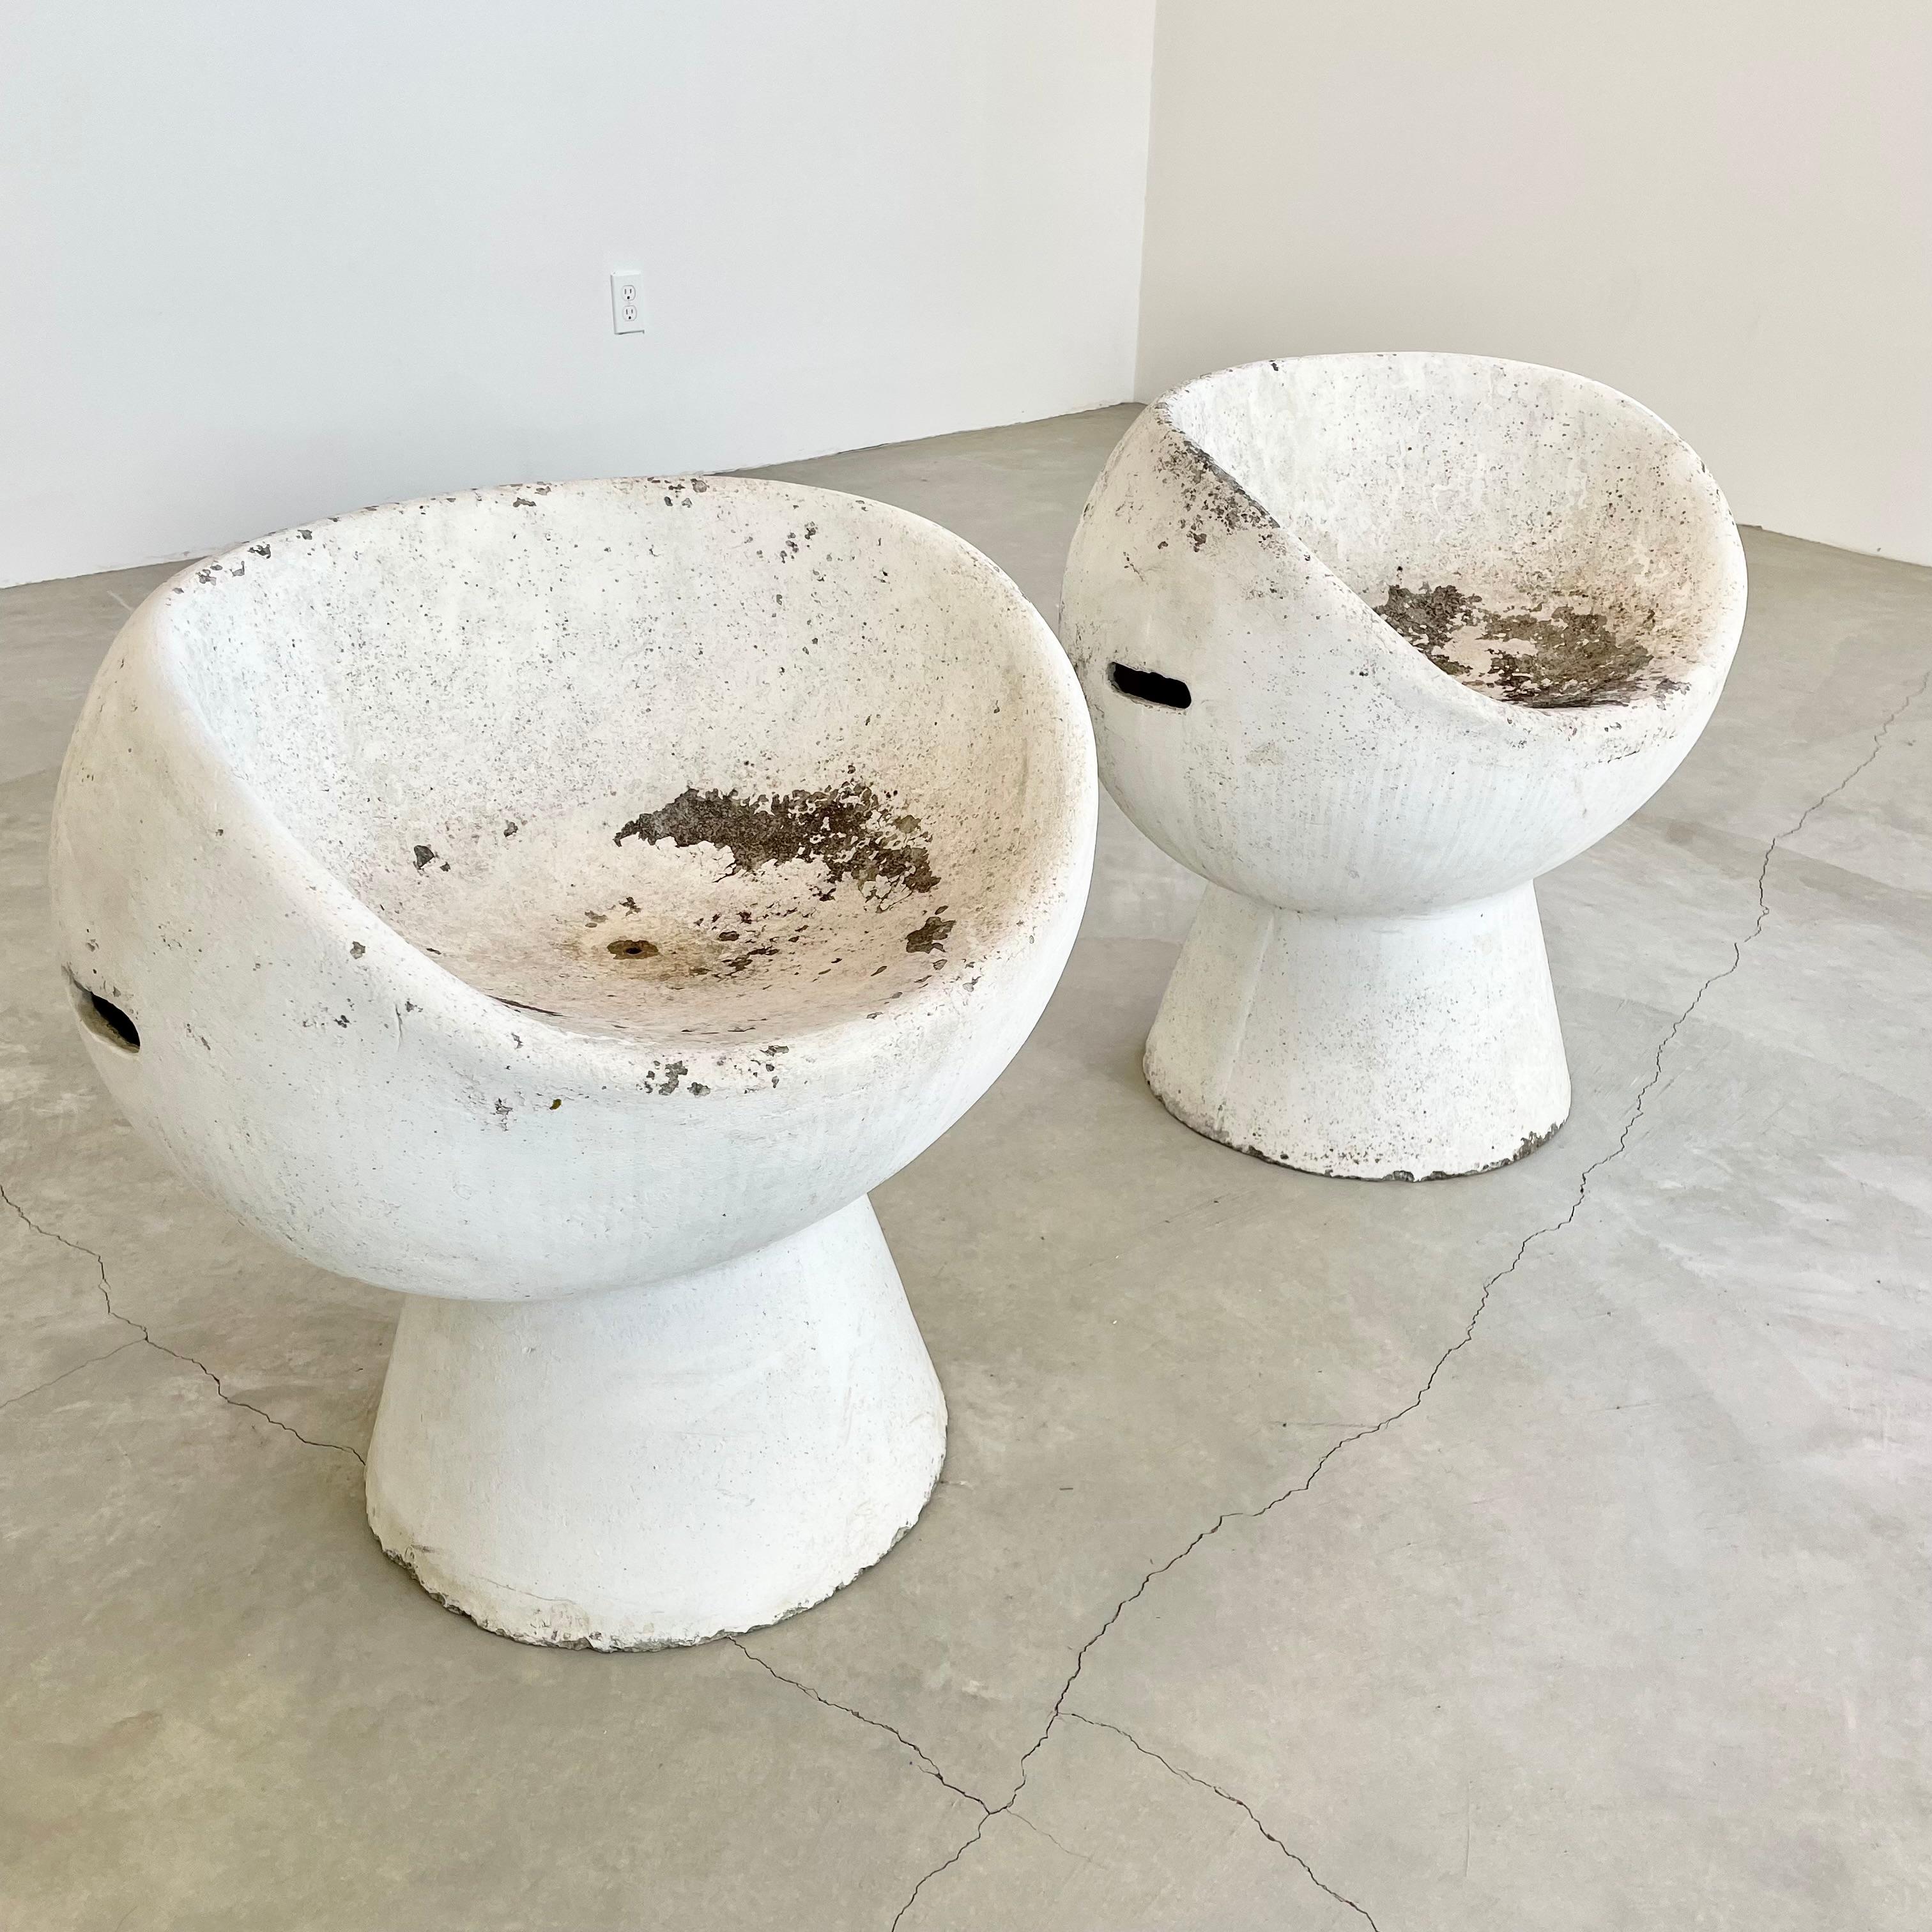 Stunning set of two concrete pod chairs designed by Swiss Architect Willy Guhl. Hand made in Switzerland by Eternit in the 1960s. Excellent patina. Factory drilled hole for water to drain. Great sculptural pieces. Perfect for indoors or outside.